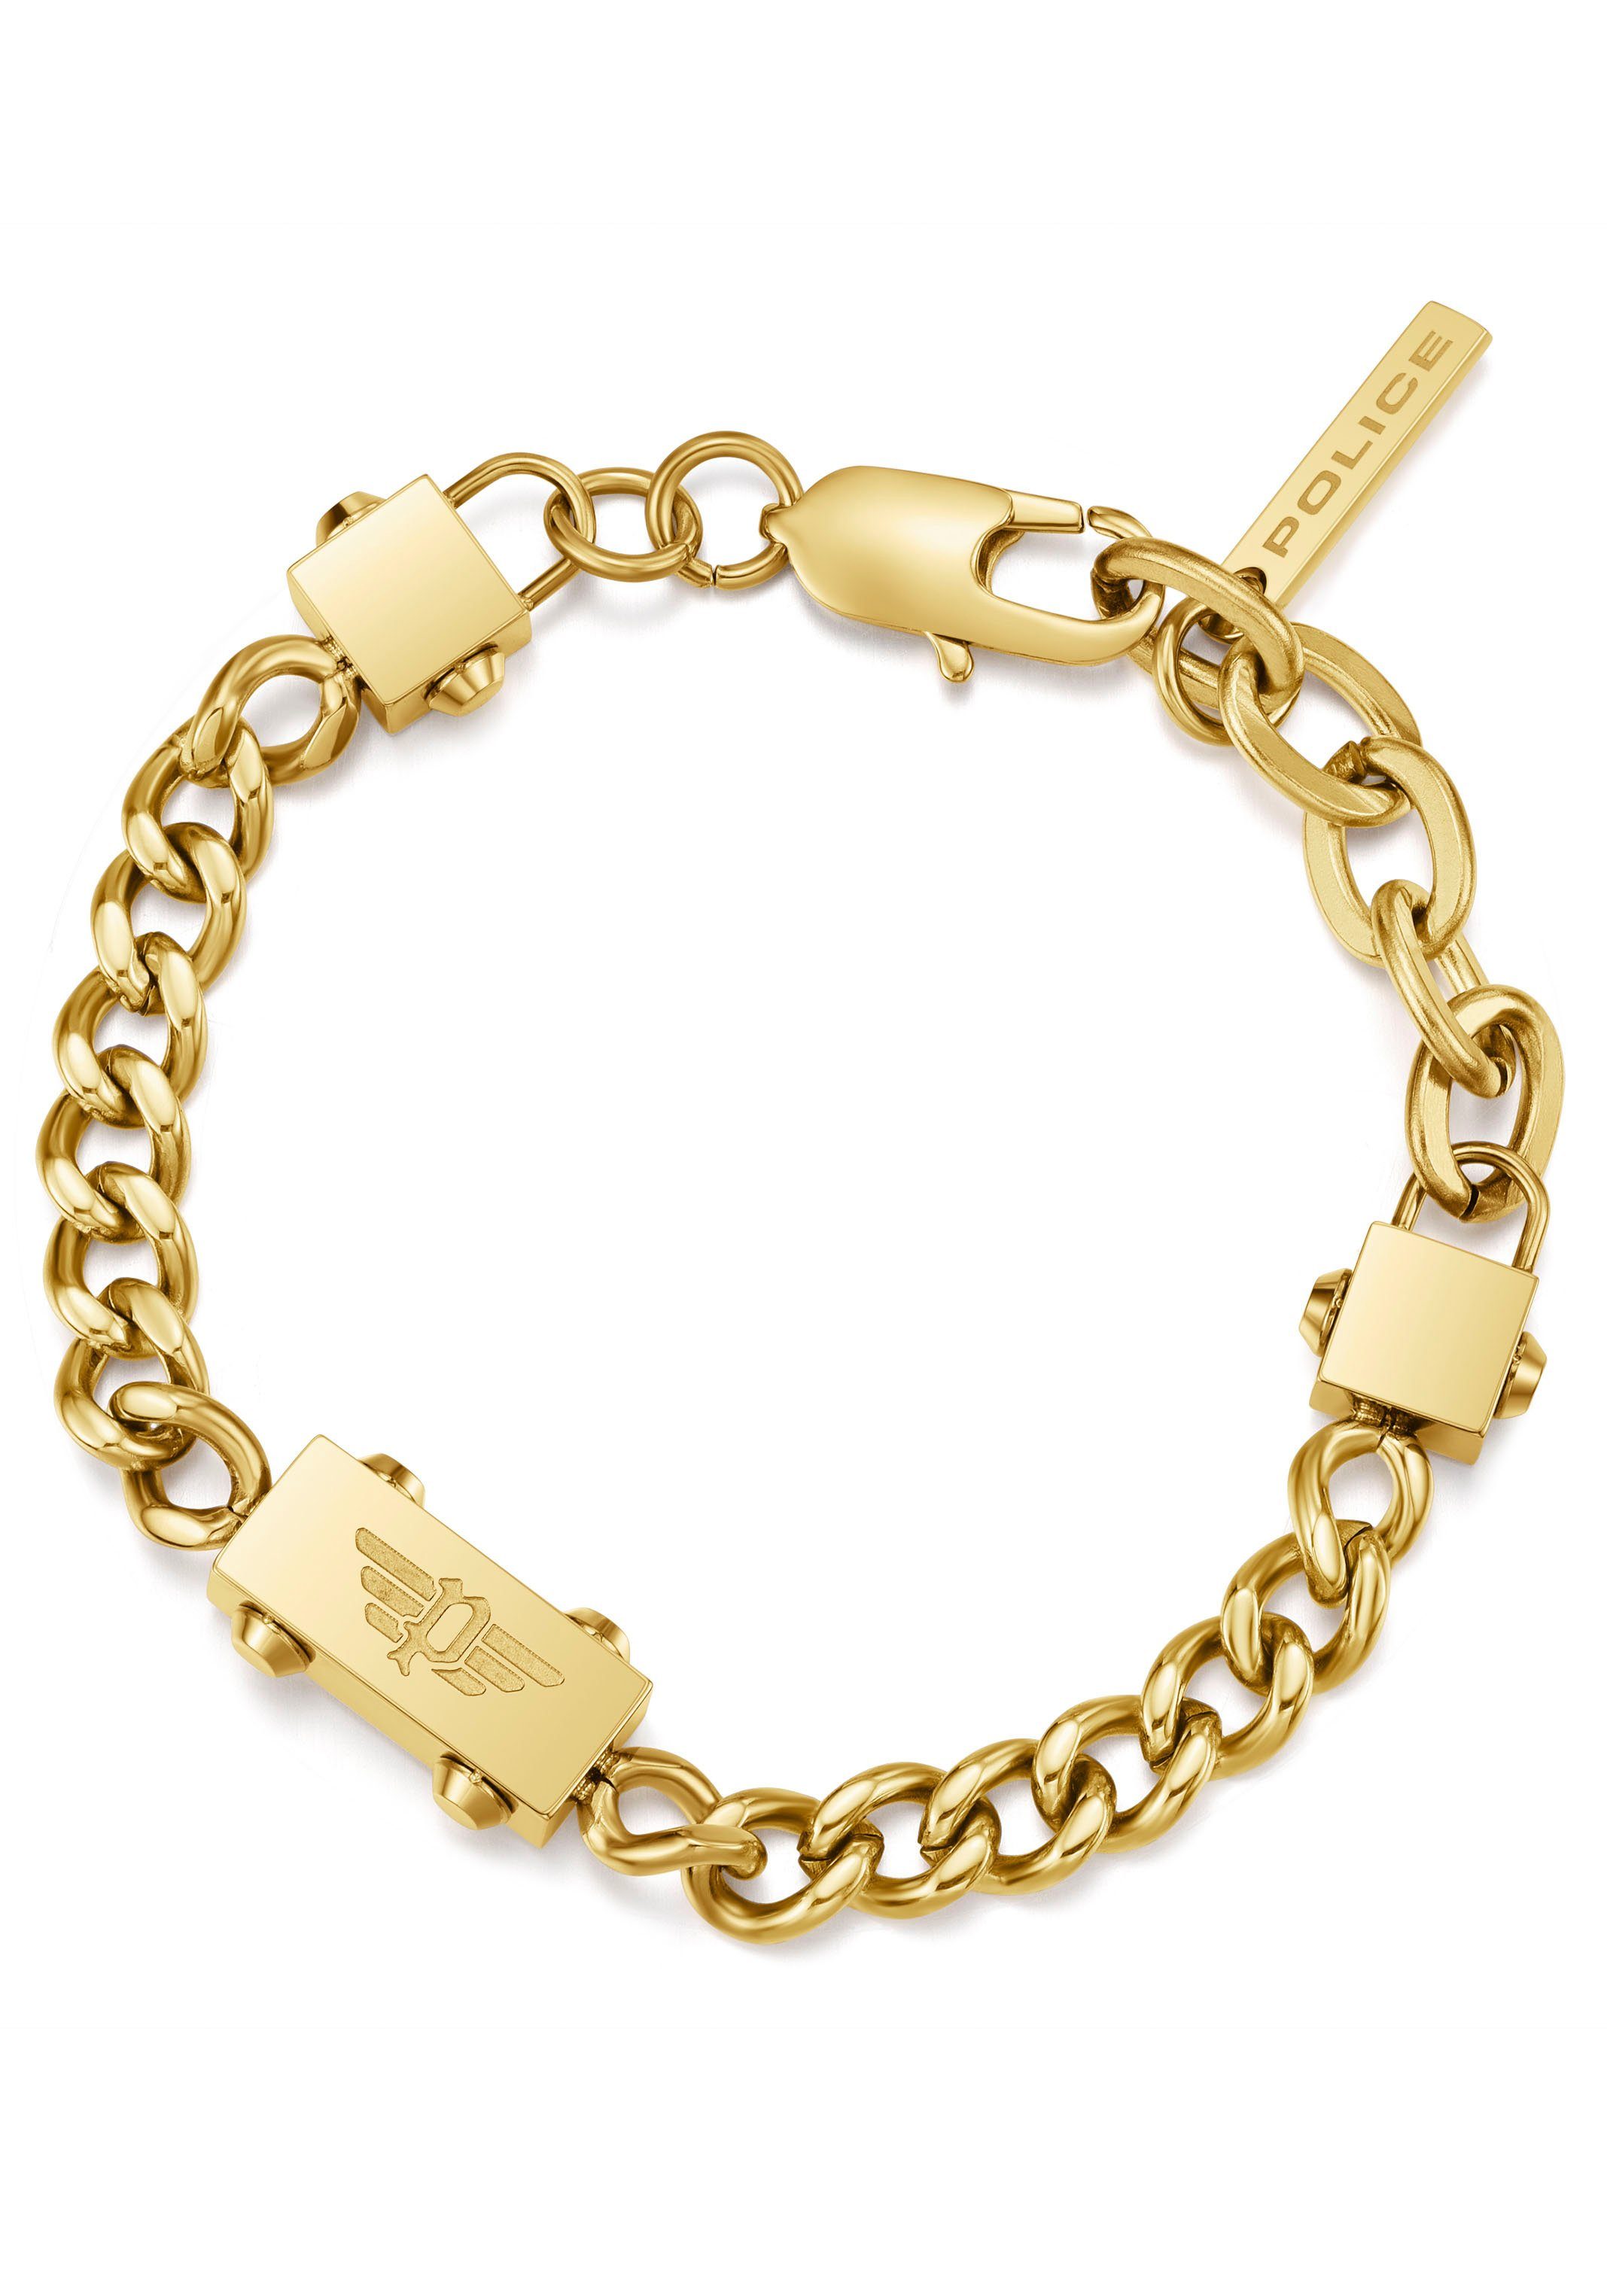 Police Armband CHAINED, PEAGB0002106 gelbgoldfarben PEAGB0002102